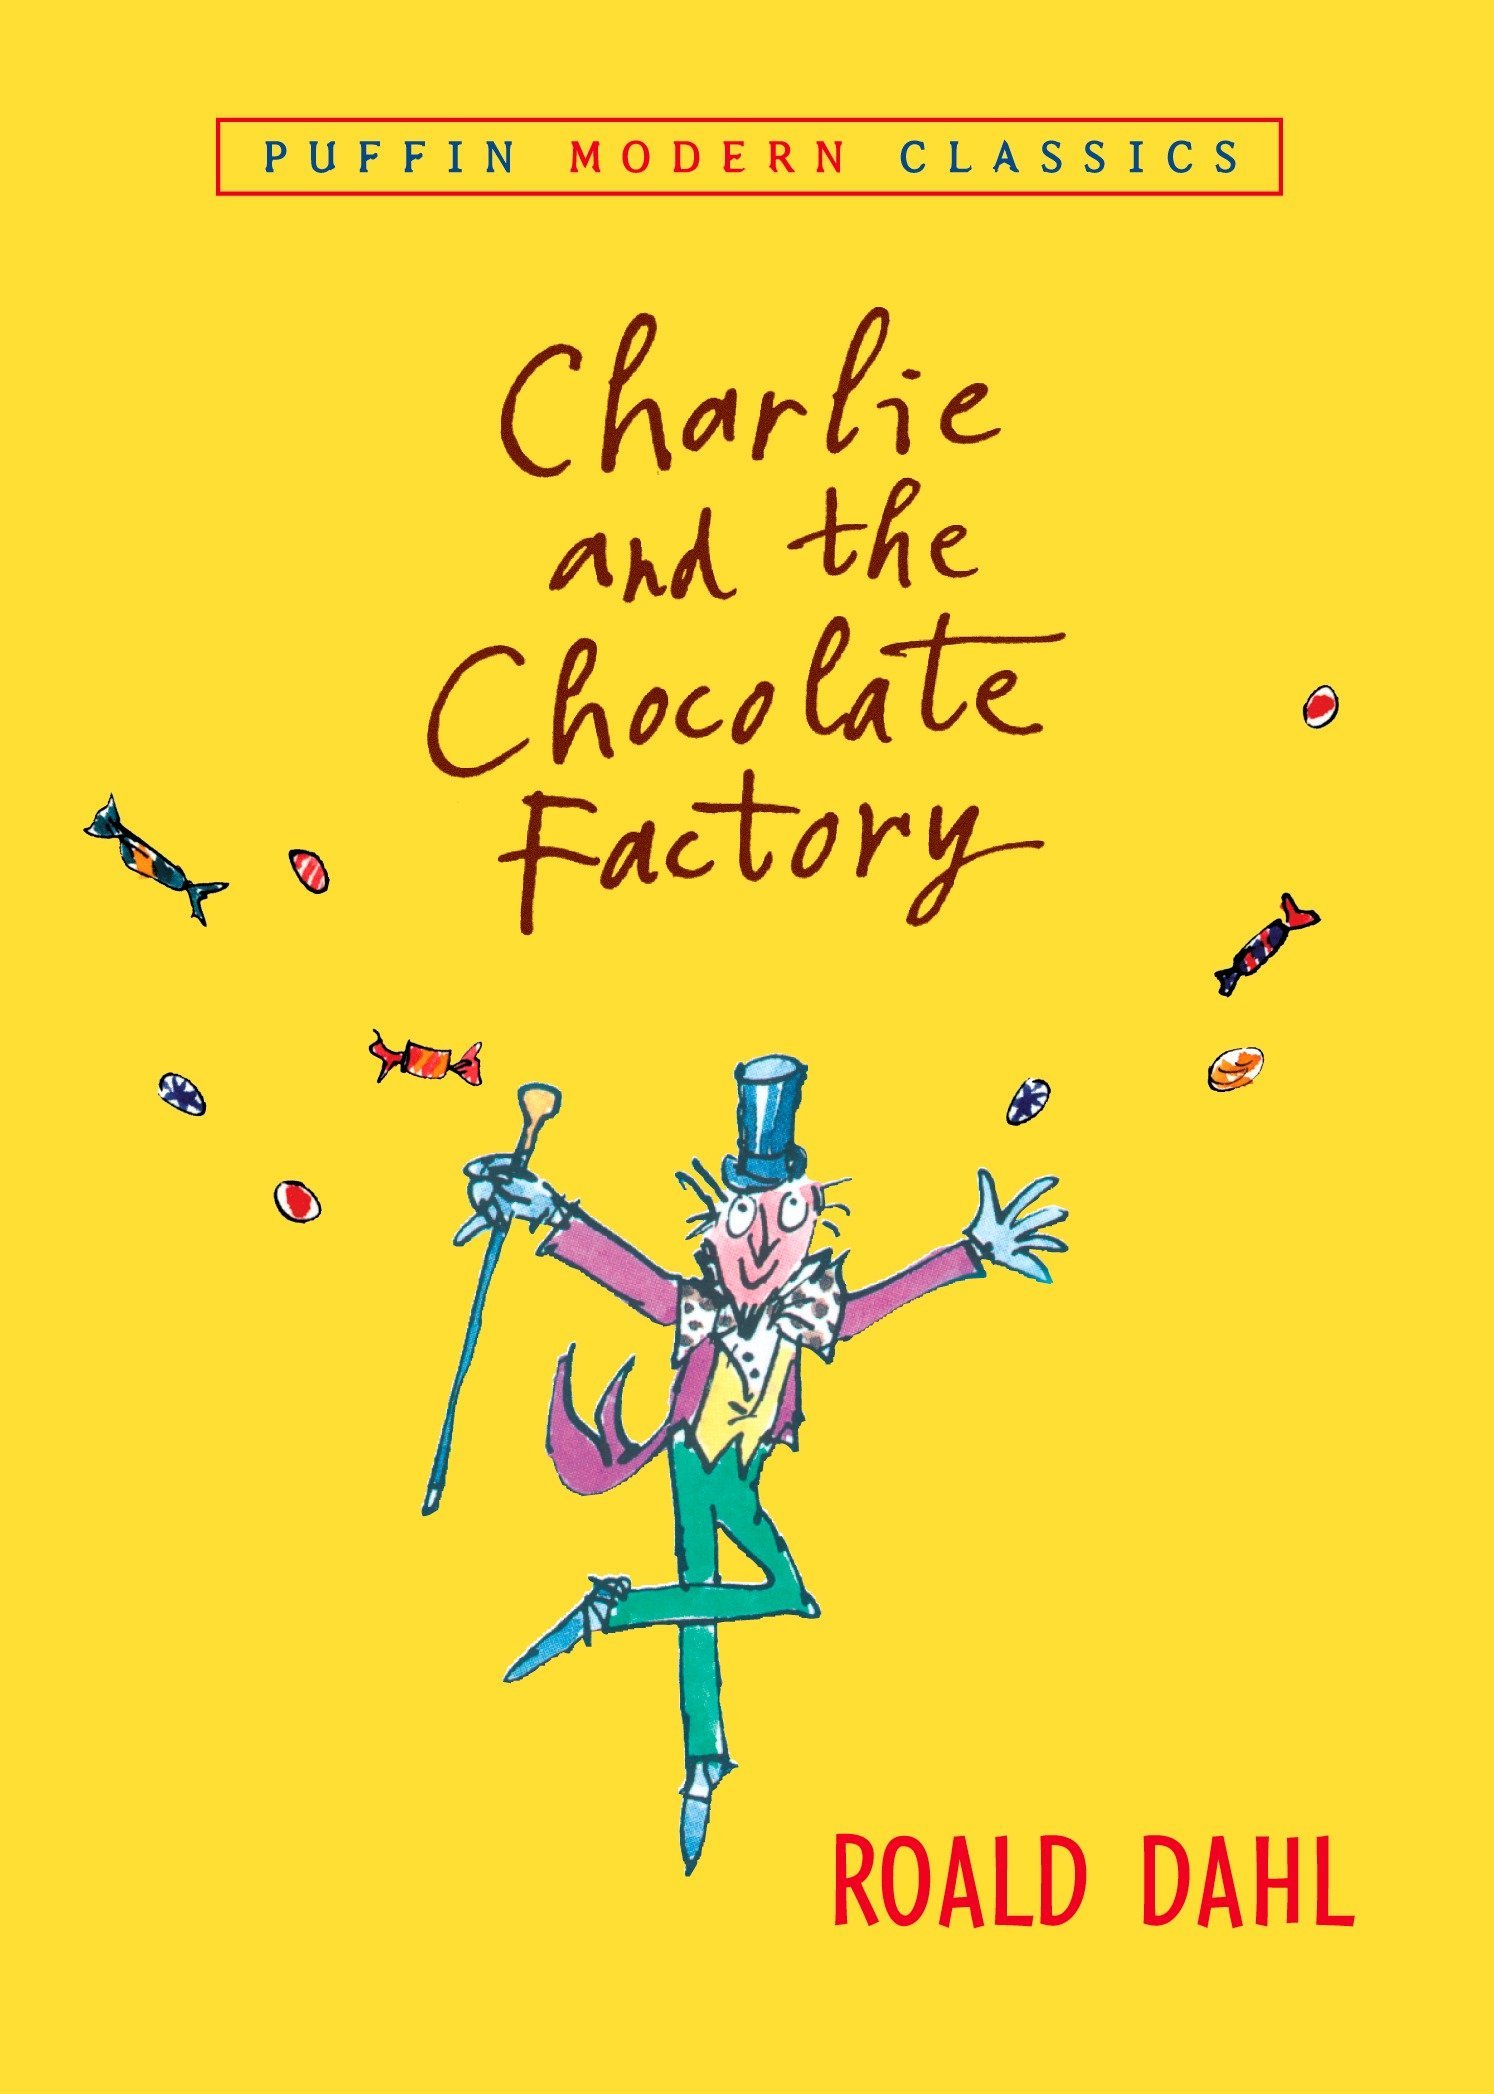 Puffin Modern Classics Charlie and The Chocolate Factory